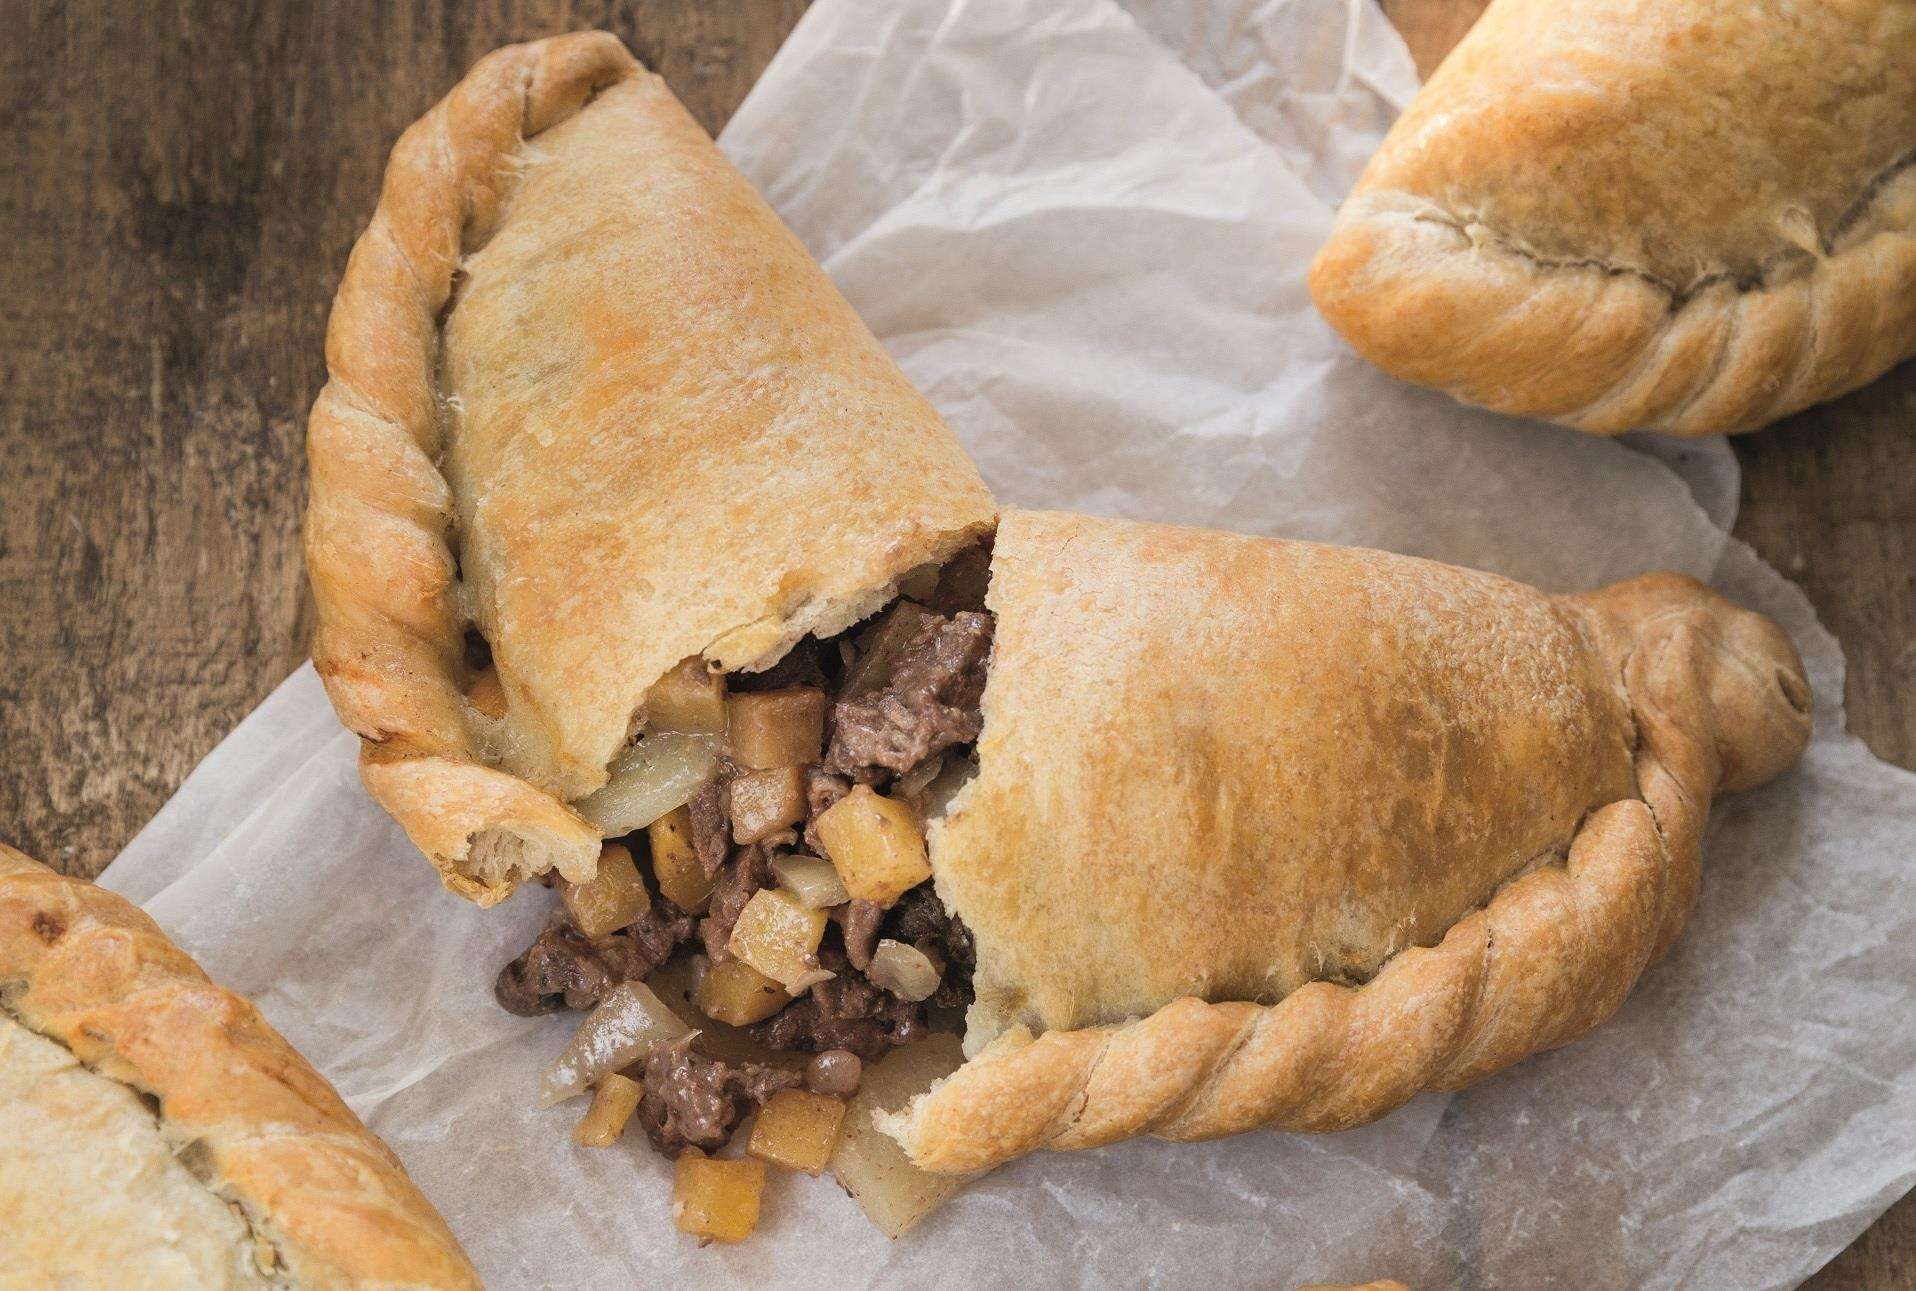 Fire crews were called to a burnt pasty. (Pasty Stock Image) Picture: Warrens Bakery.